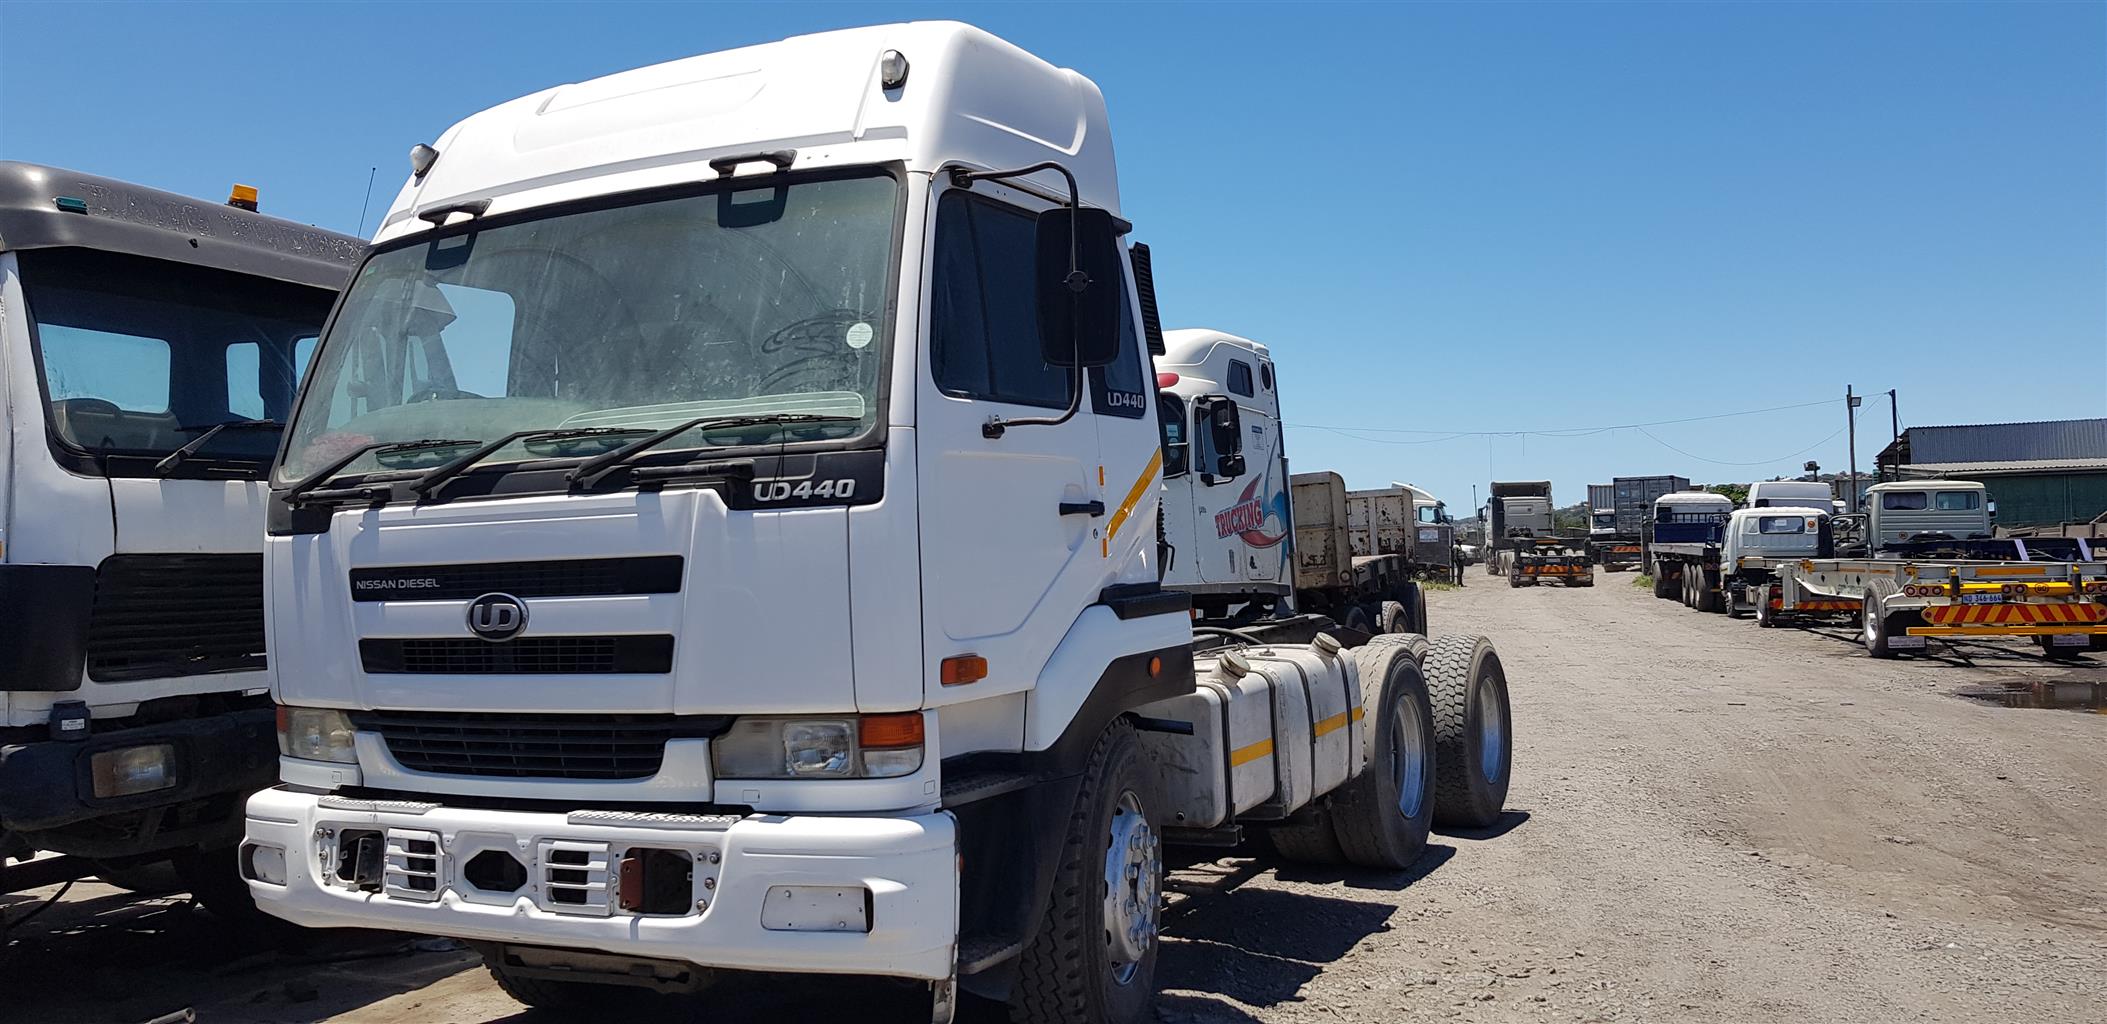 Nissan UD 440 Truck Tractor Negotiable 